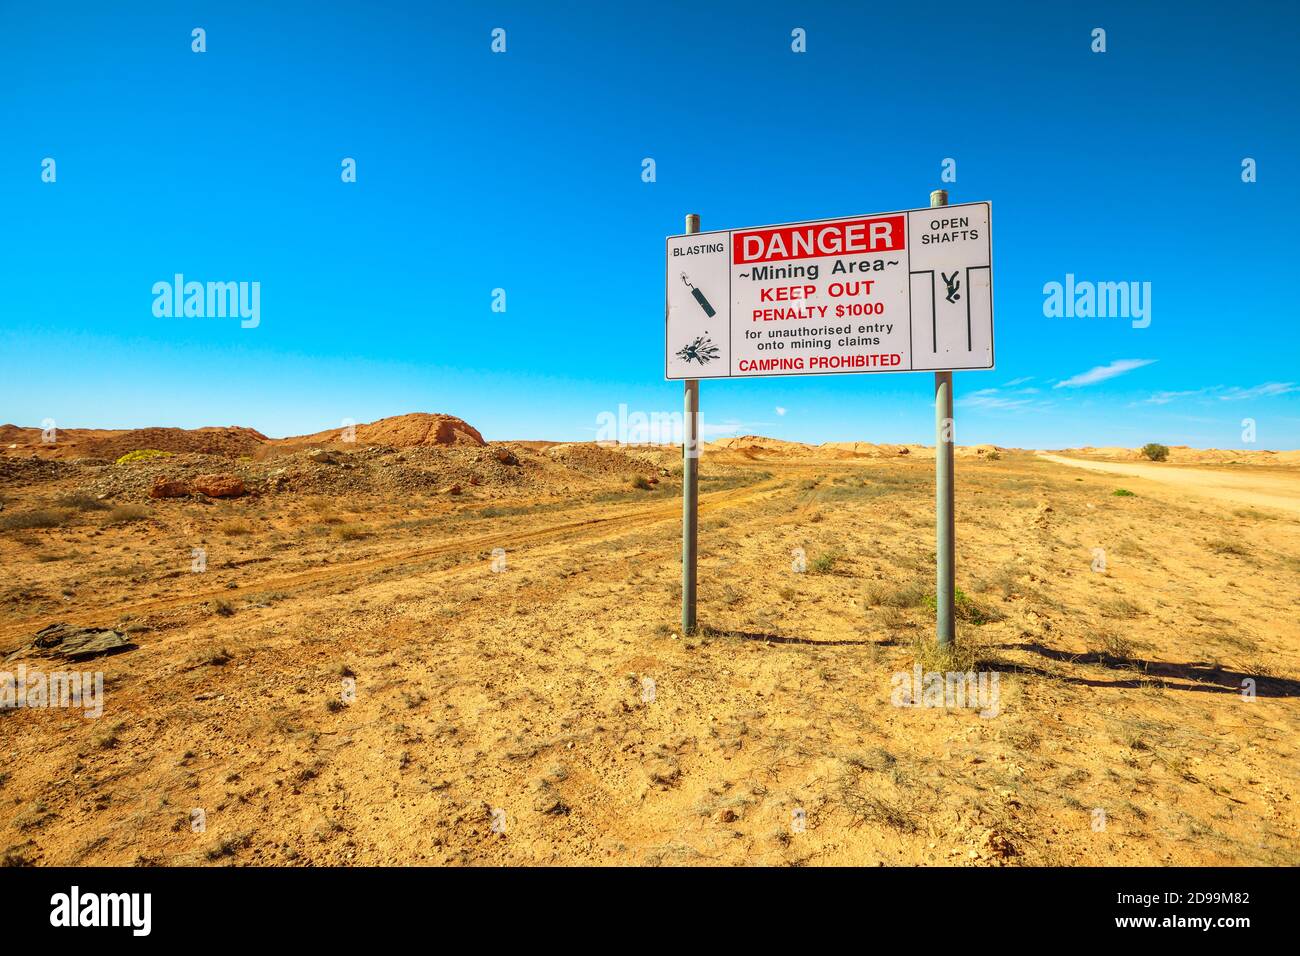 Mining road sign in Coober Pedy underground town in Australia. Opal mining town in the Australian outback Stock Photo Alamy